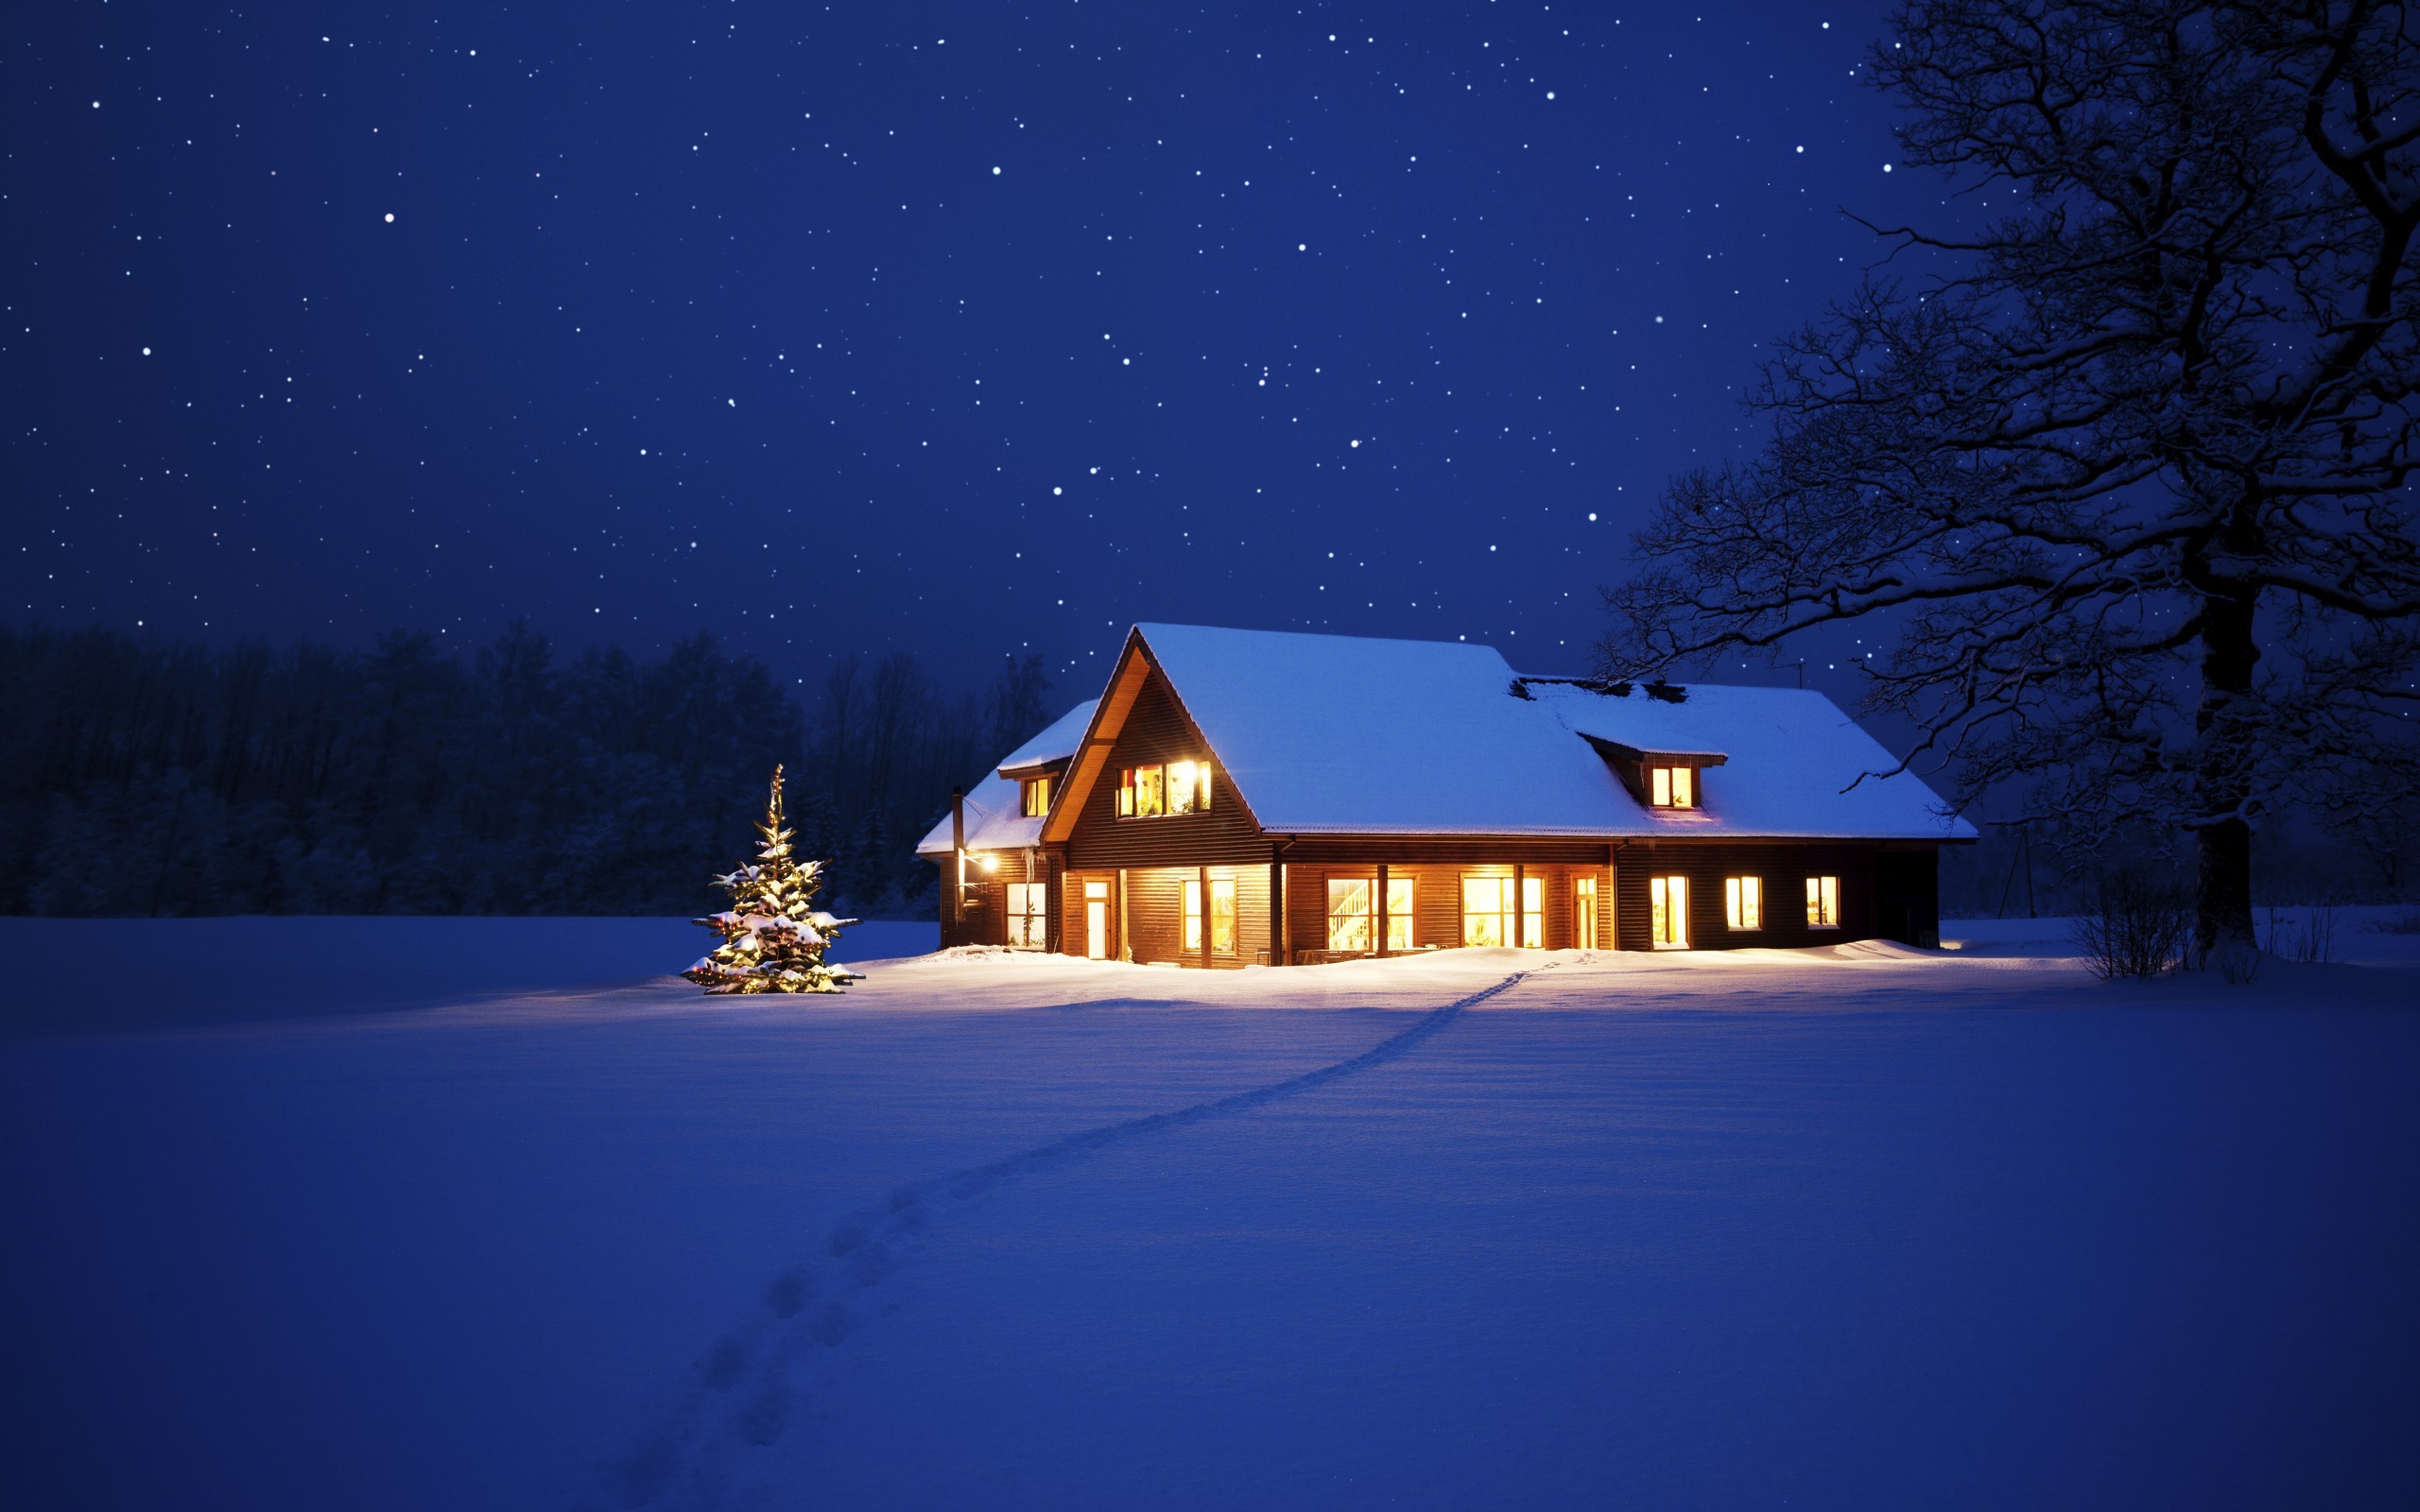 Lonely House In The Snow Wallpaper And Image